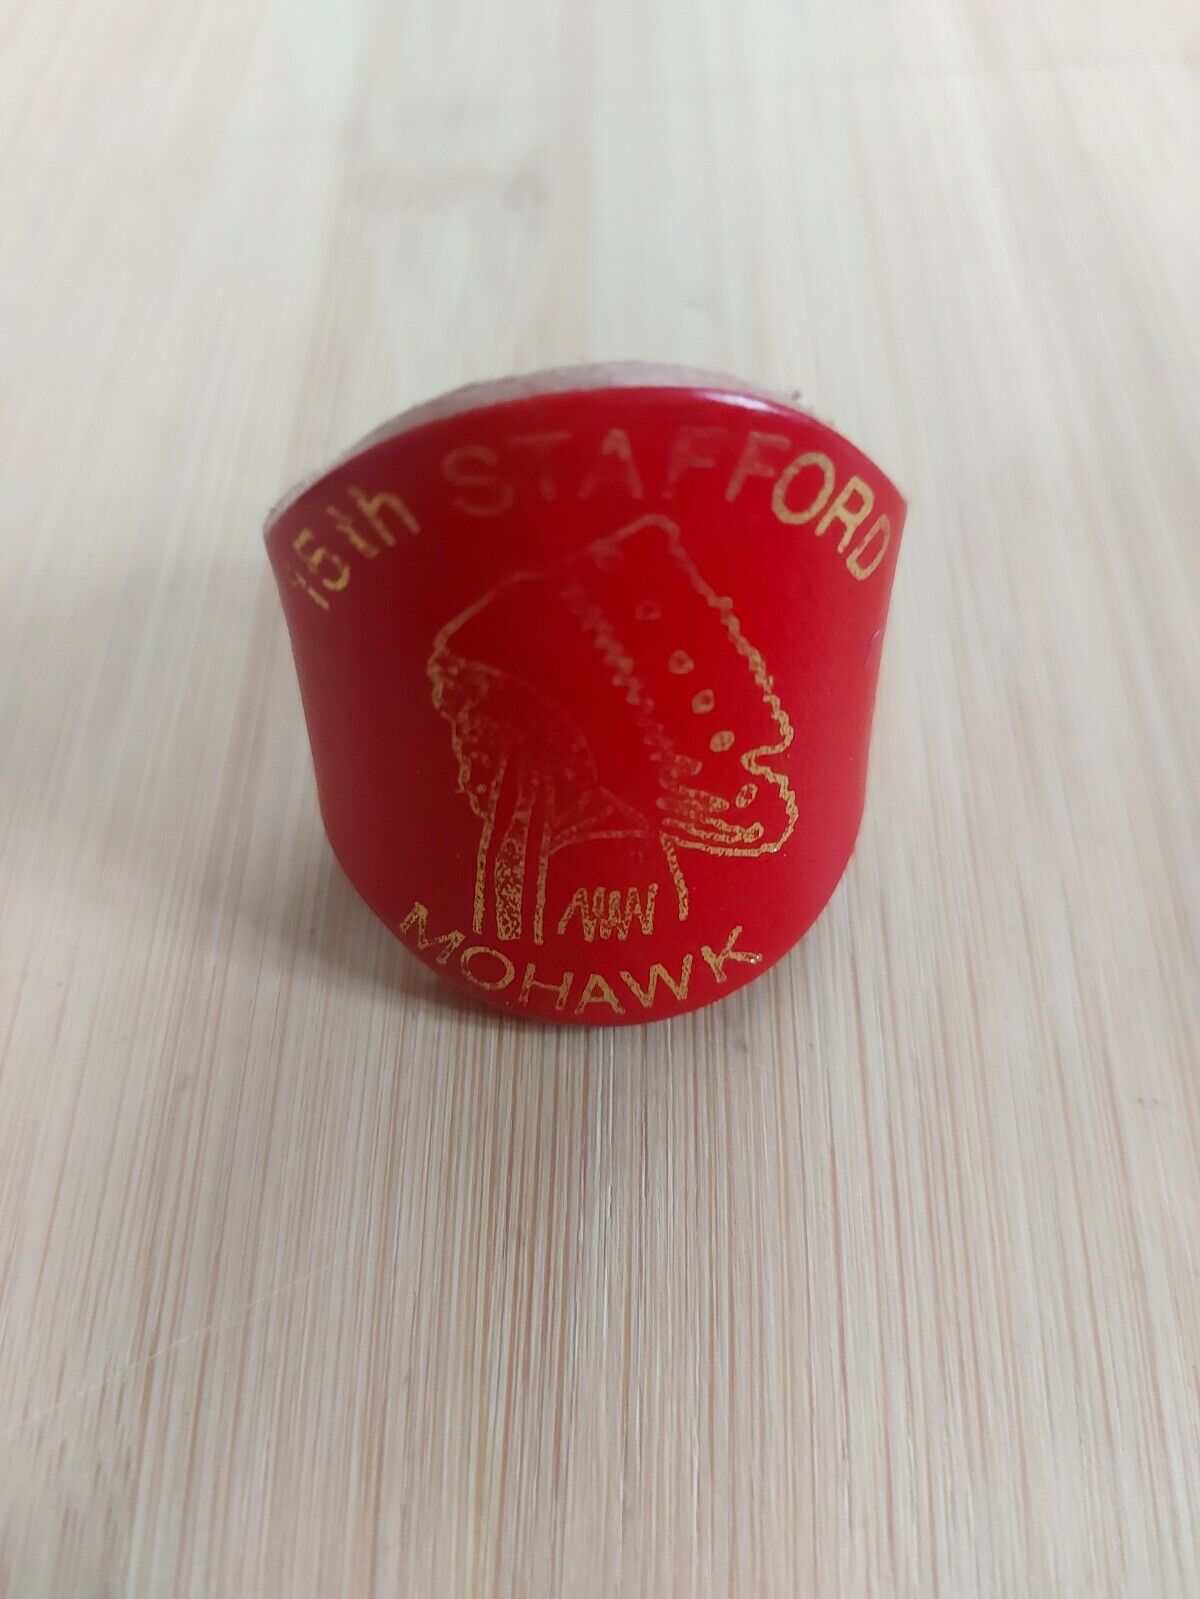 UK Scouting Scout Woggle 15th Stafford Mohawk